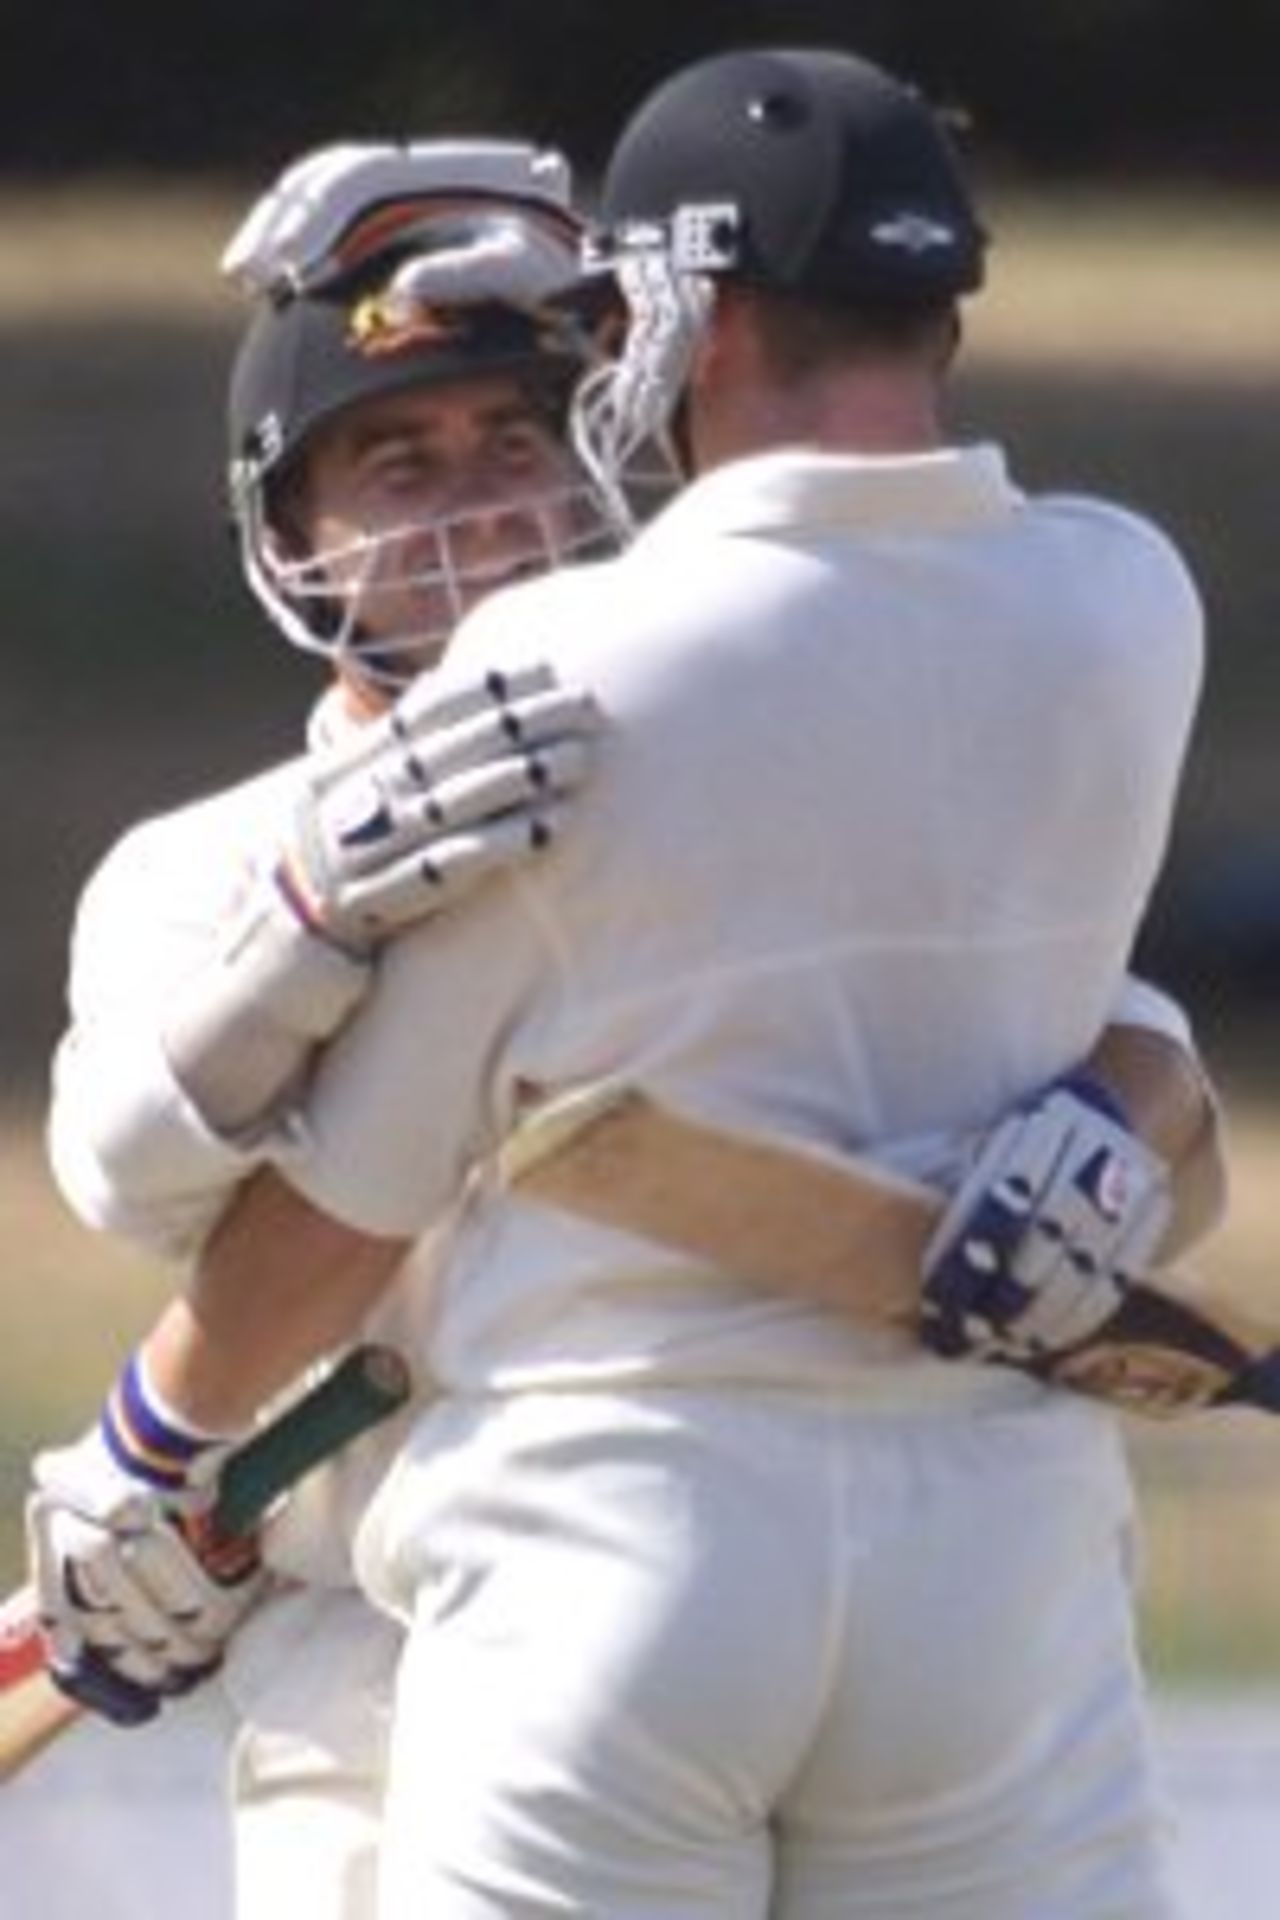 03 Apr 2000: Justin Langer of Australia hugs team mate Adam Gilchrist as Australia wins the test, during day four of the third test between New Zealand and Australia, at WestpacTrust Park, Hamilton, New Zealand. Australia won by six wickets.